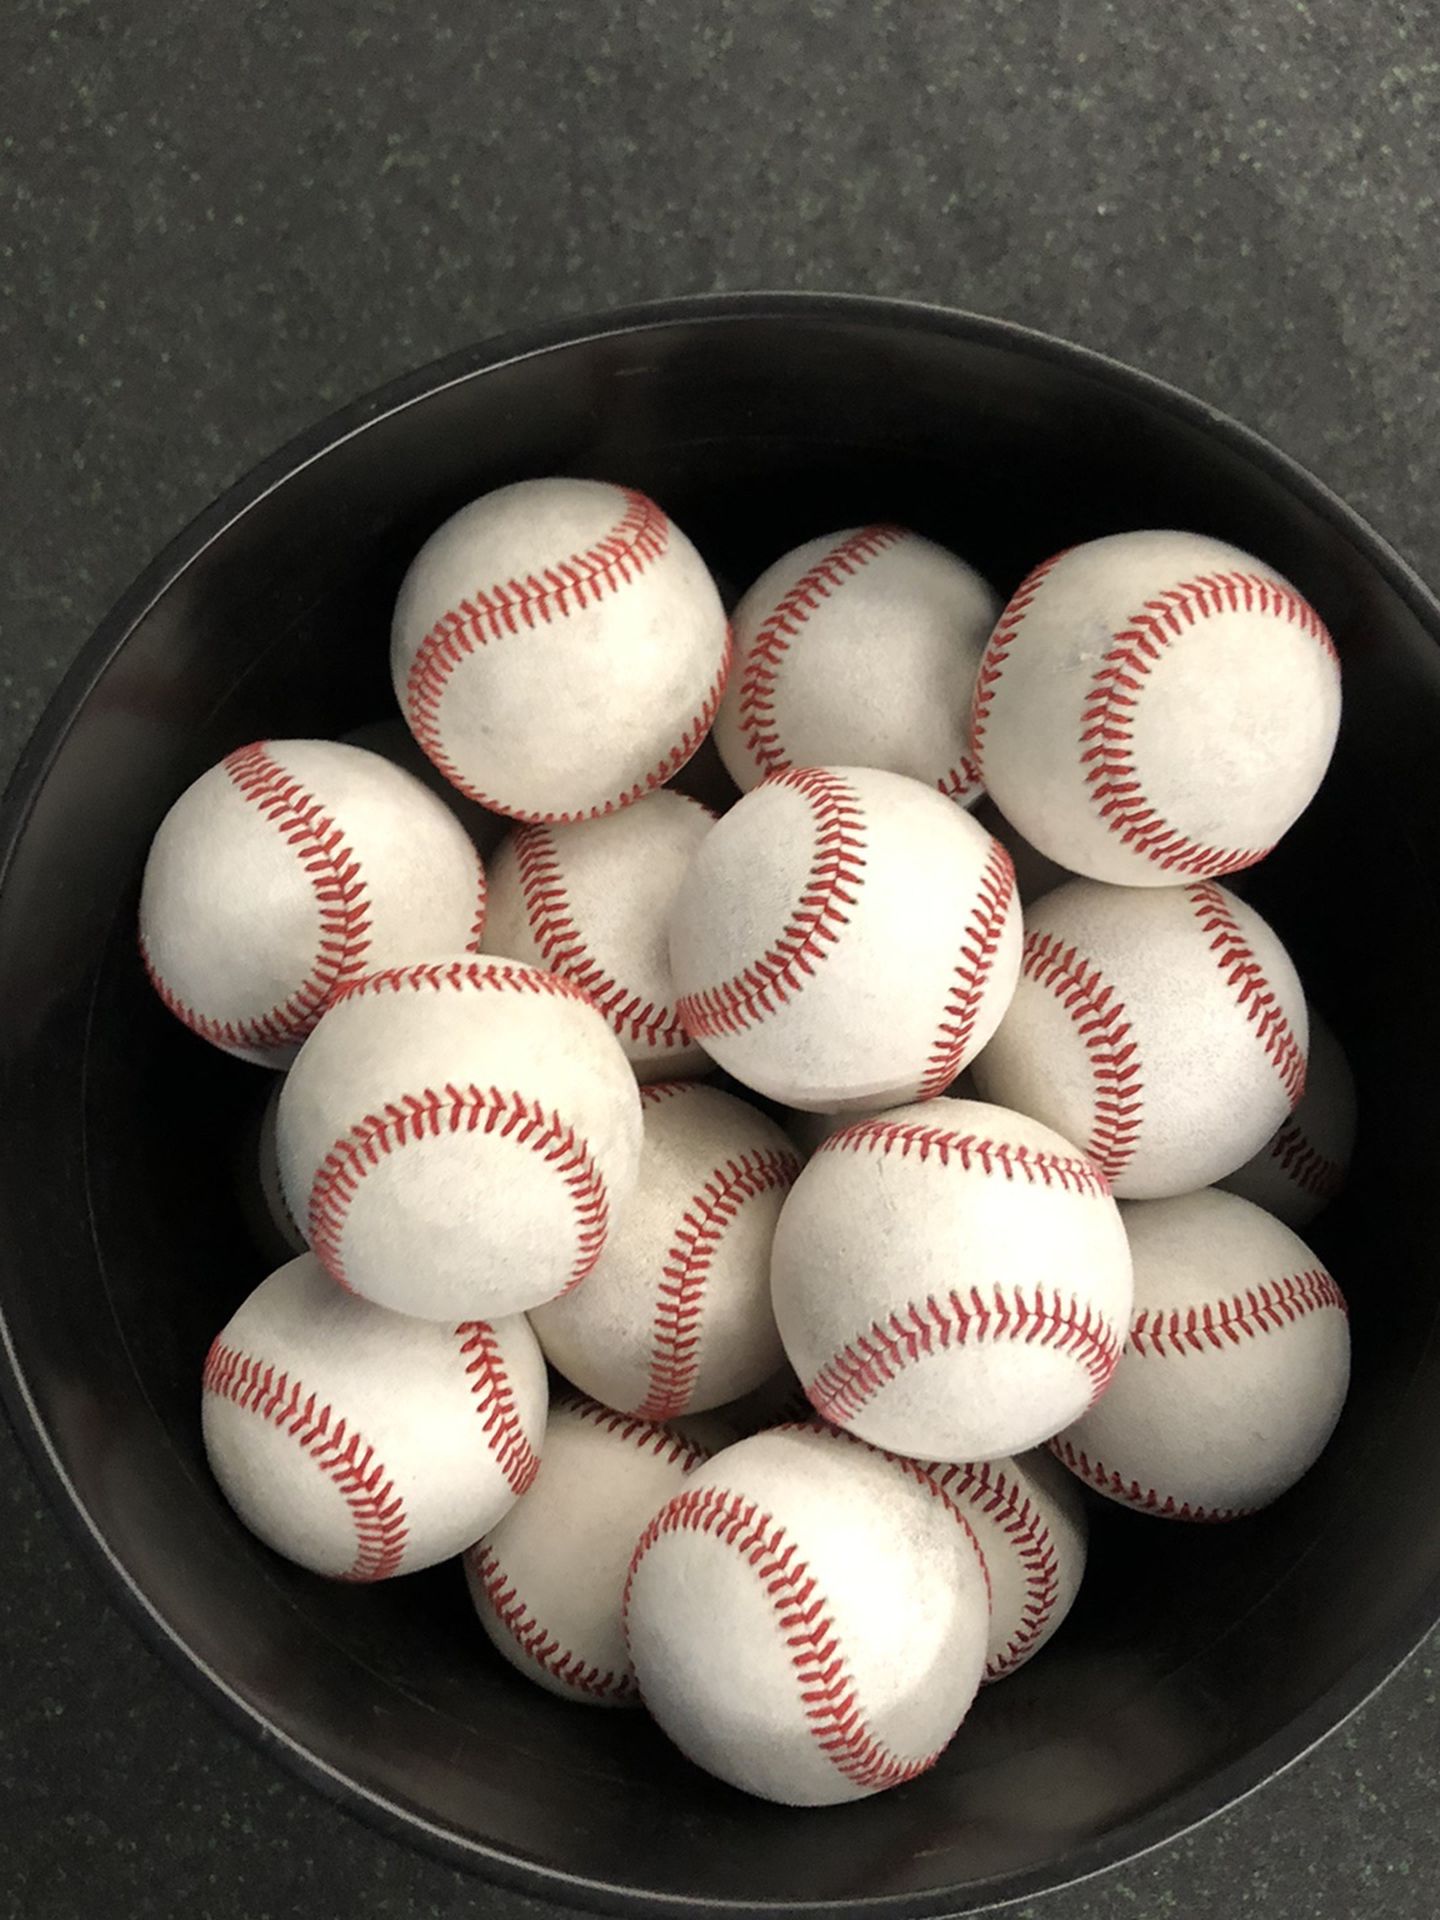 70 Used Leather Baseballs - Great For Batting Practice